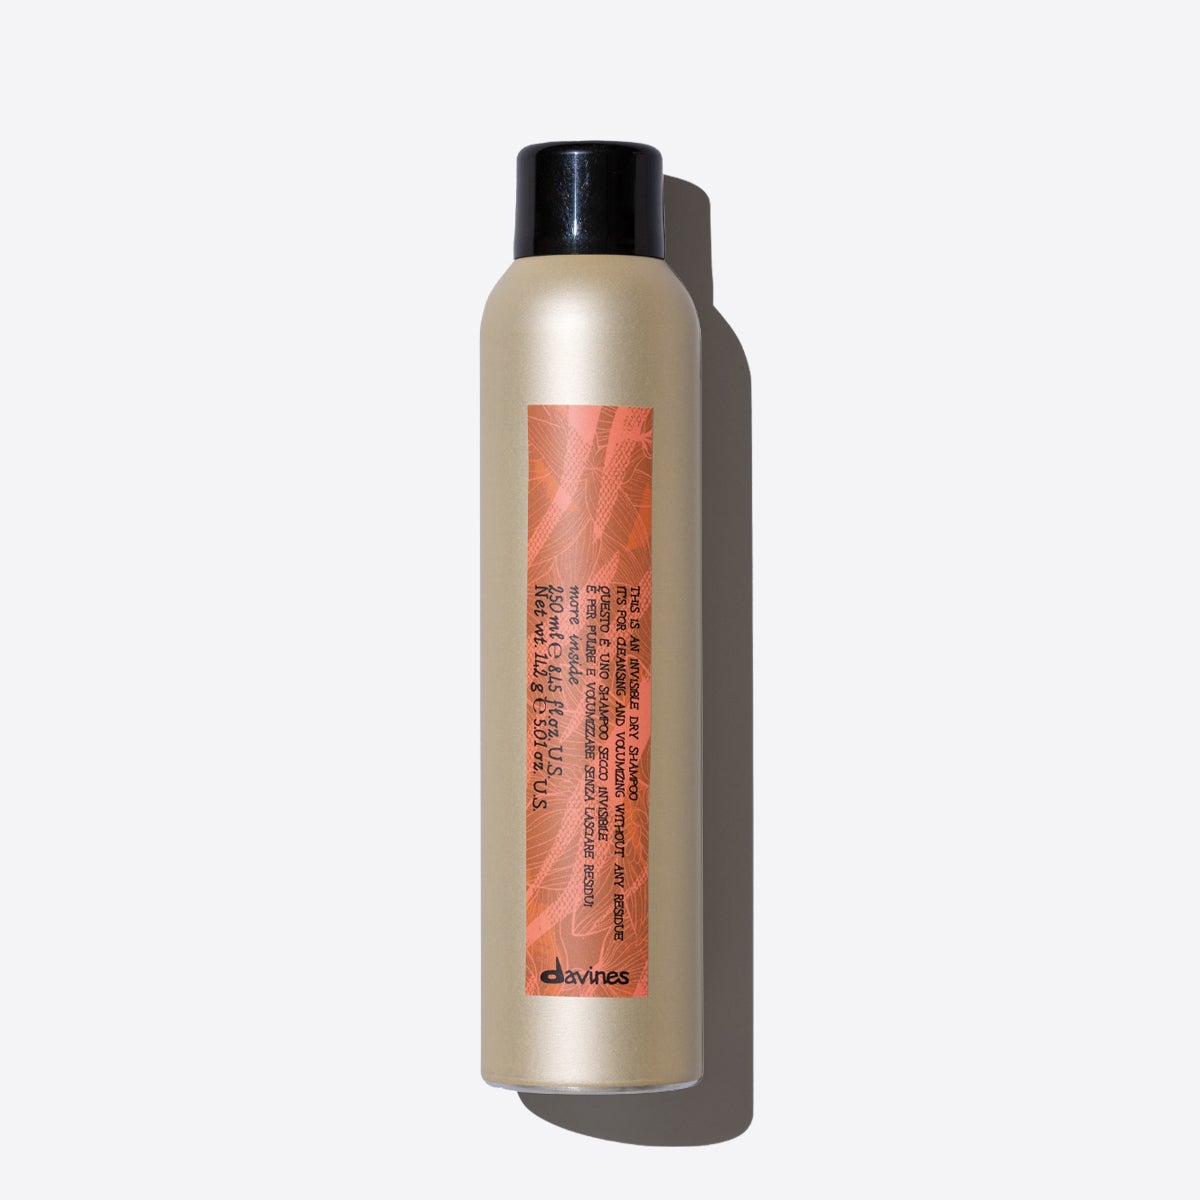 Dry shampoo This is an Invisible Dry Shampoo